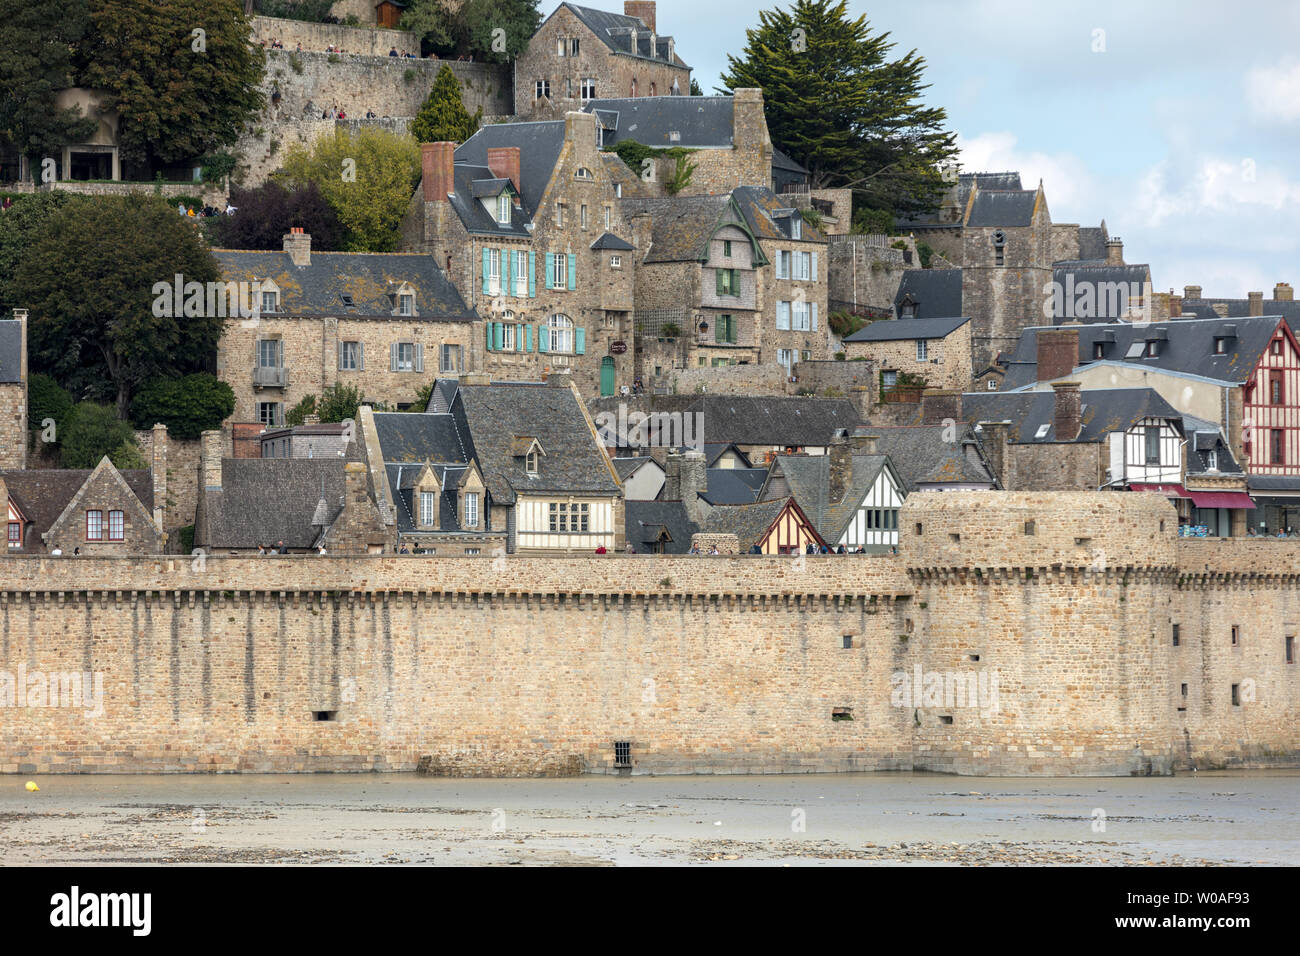 Le Mont Saint-Michel, medieval fortified abbey and village on a tidal island in the Normandy, France, at low tide Stock Photo